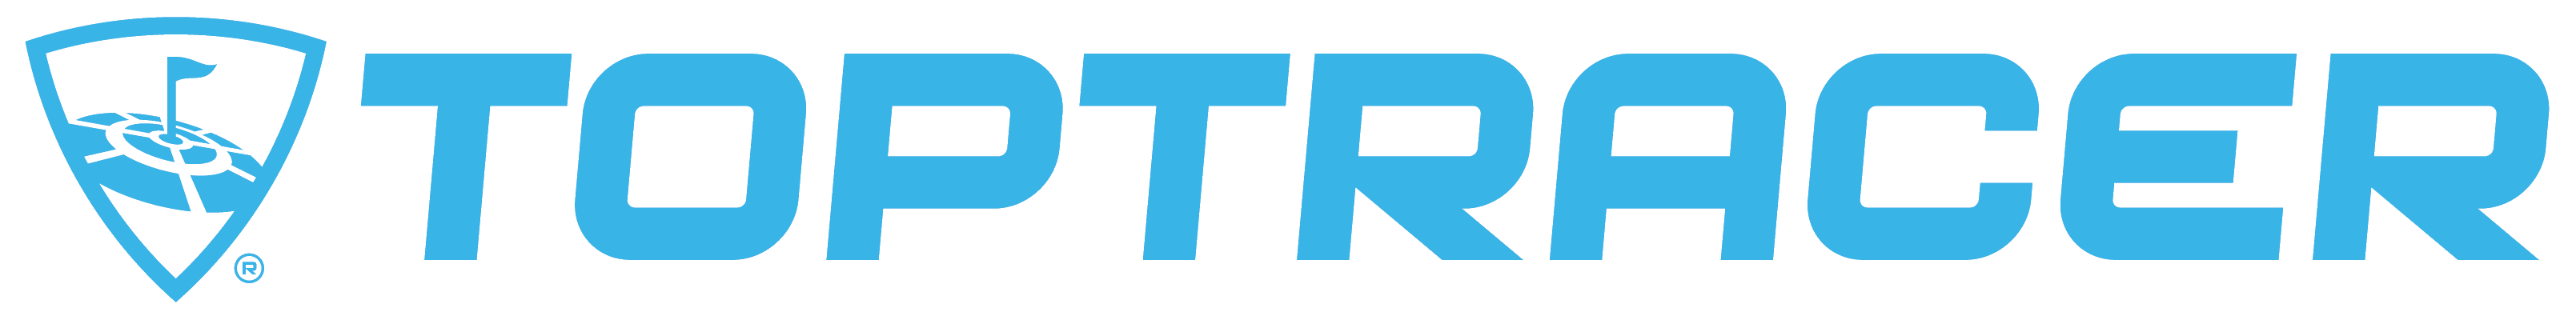 toptracer